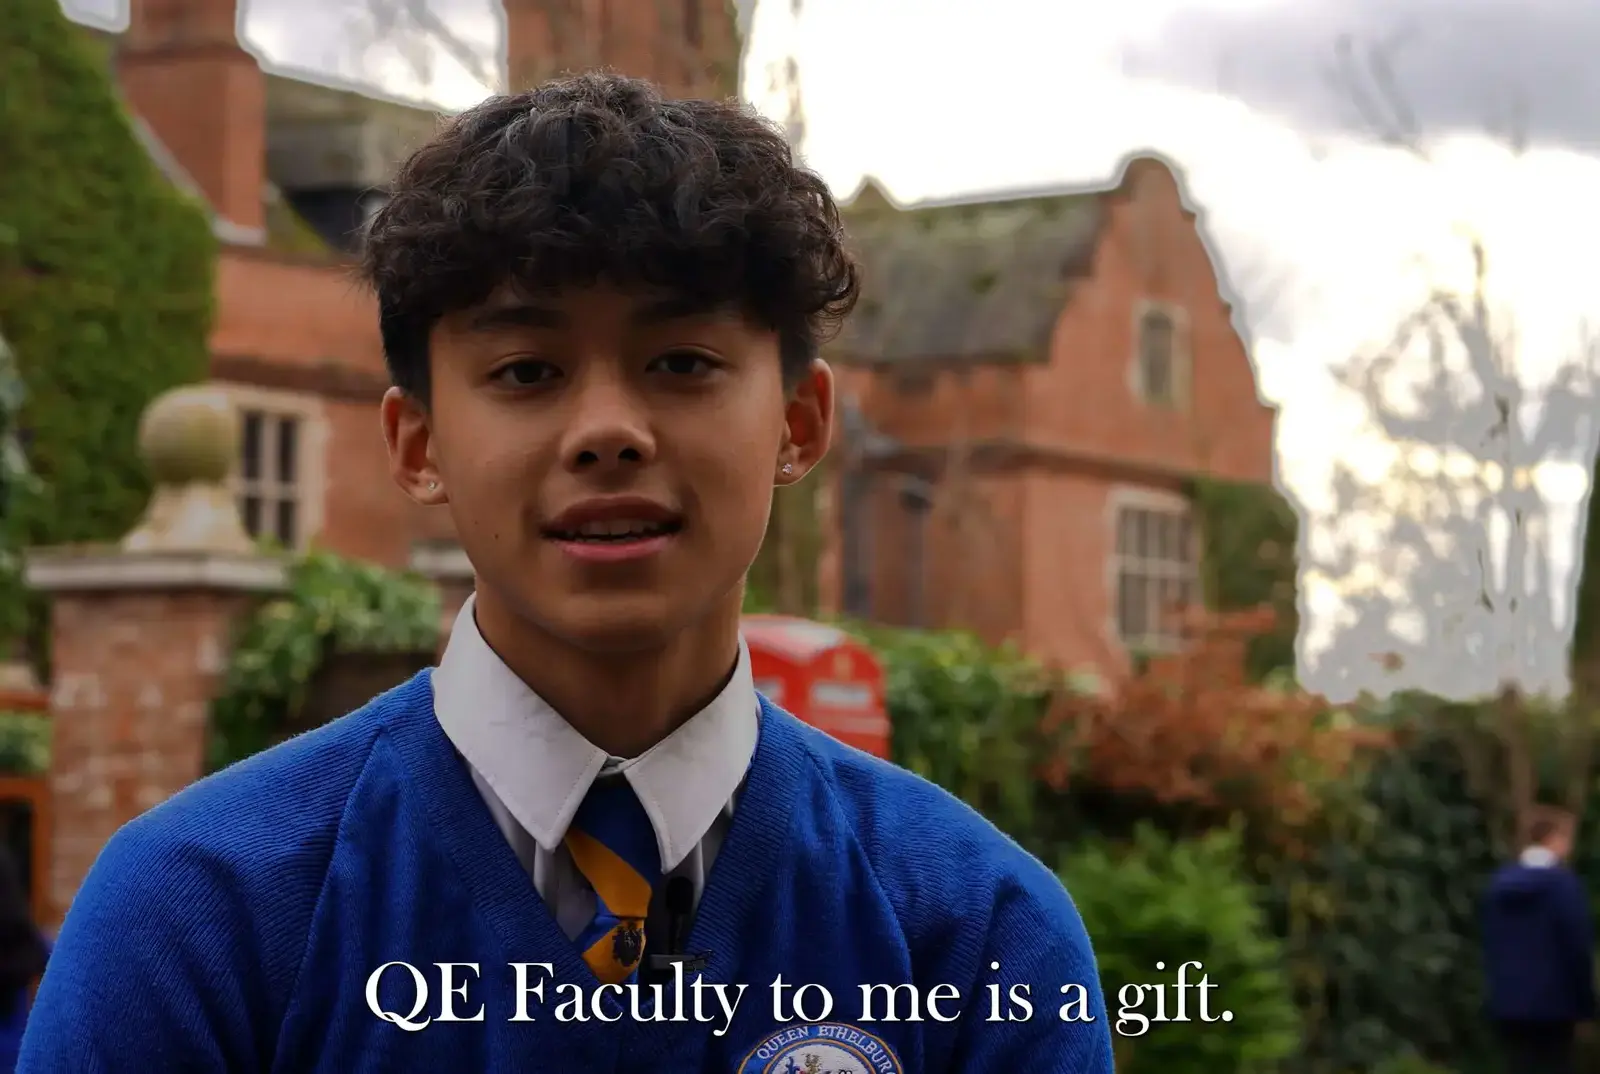 Male Faculty student talks about why he loves Queen Ethelburga's Collegiate.